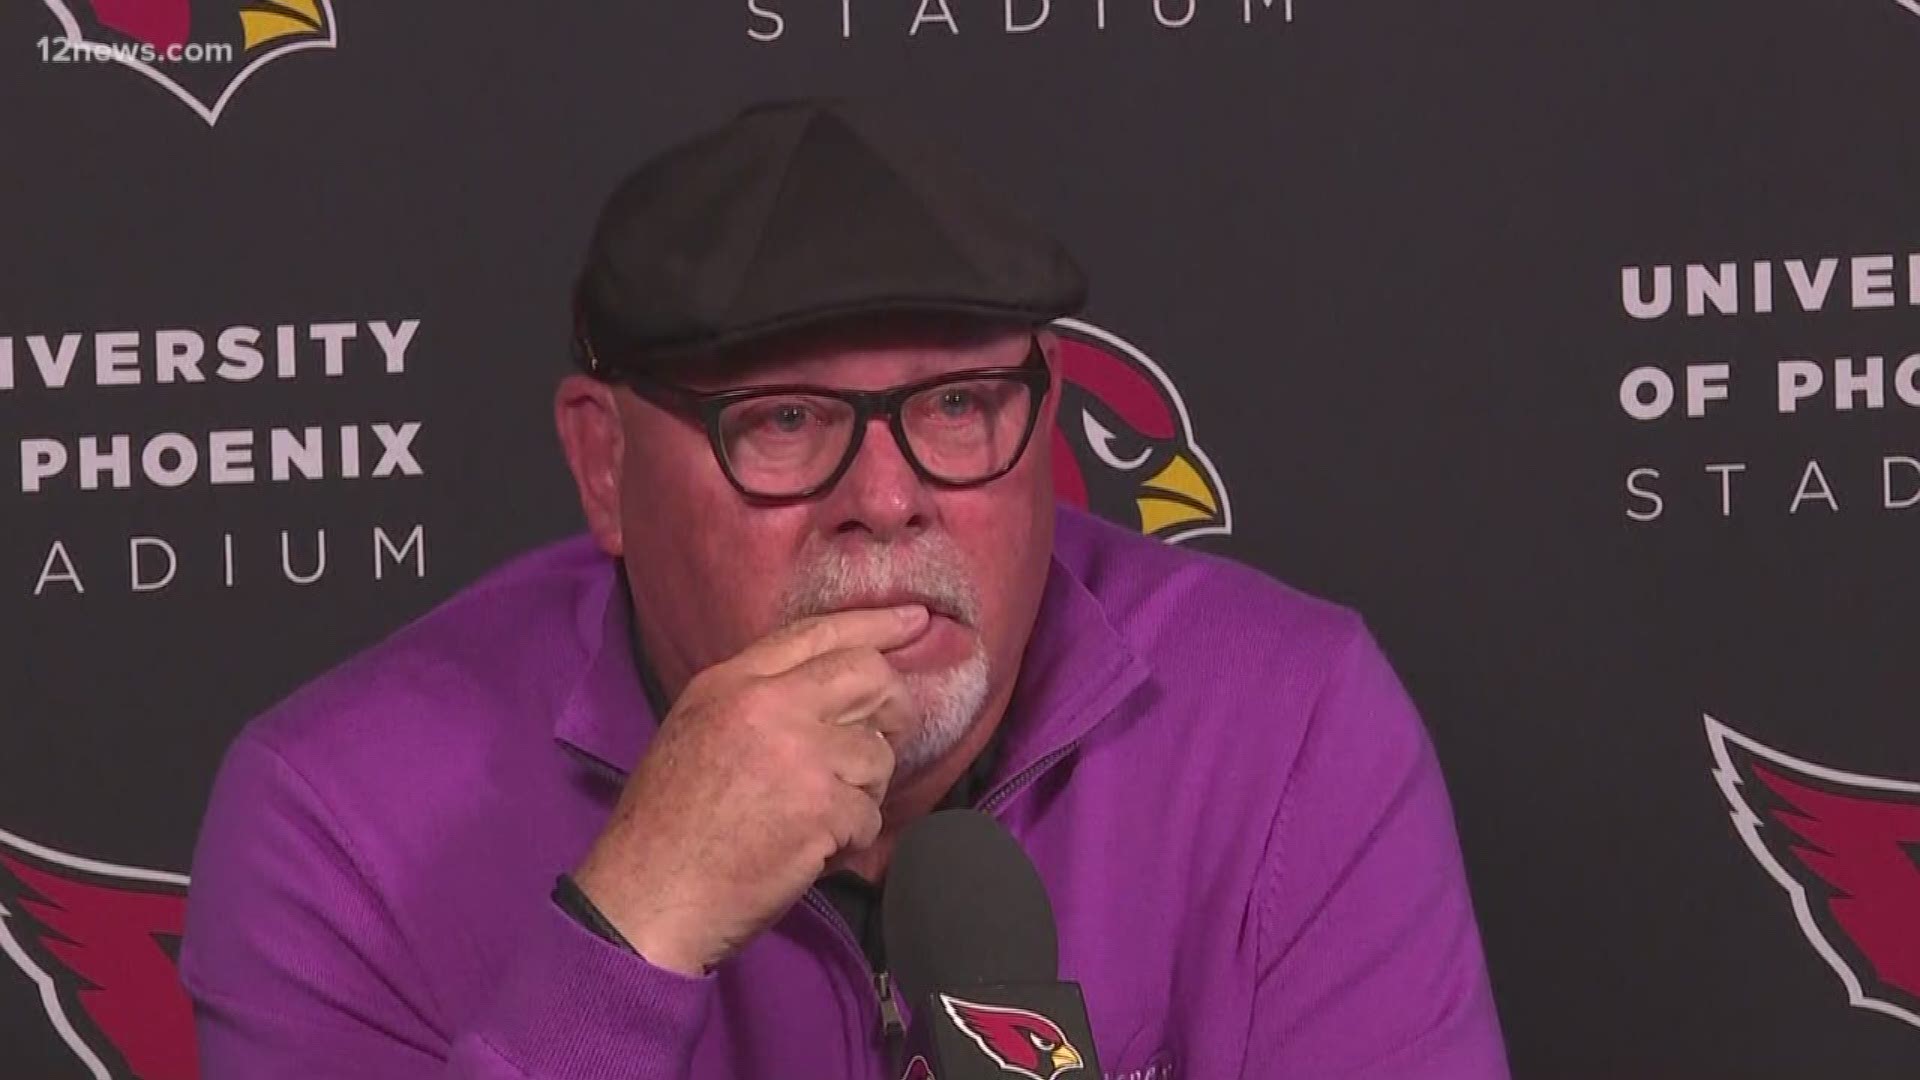 Arizona Cardinals coach Bruce Arians announced his retirement from coaching.